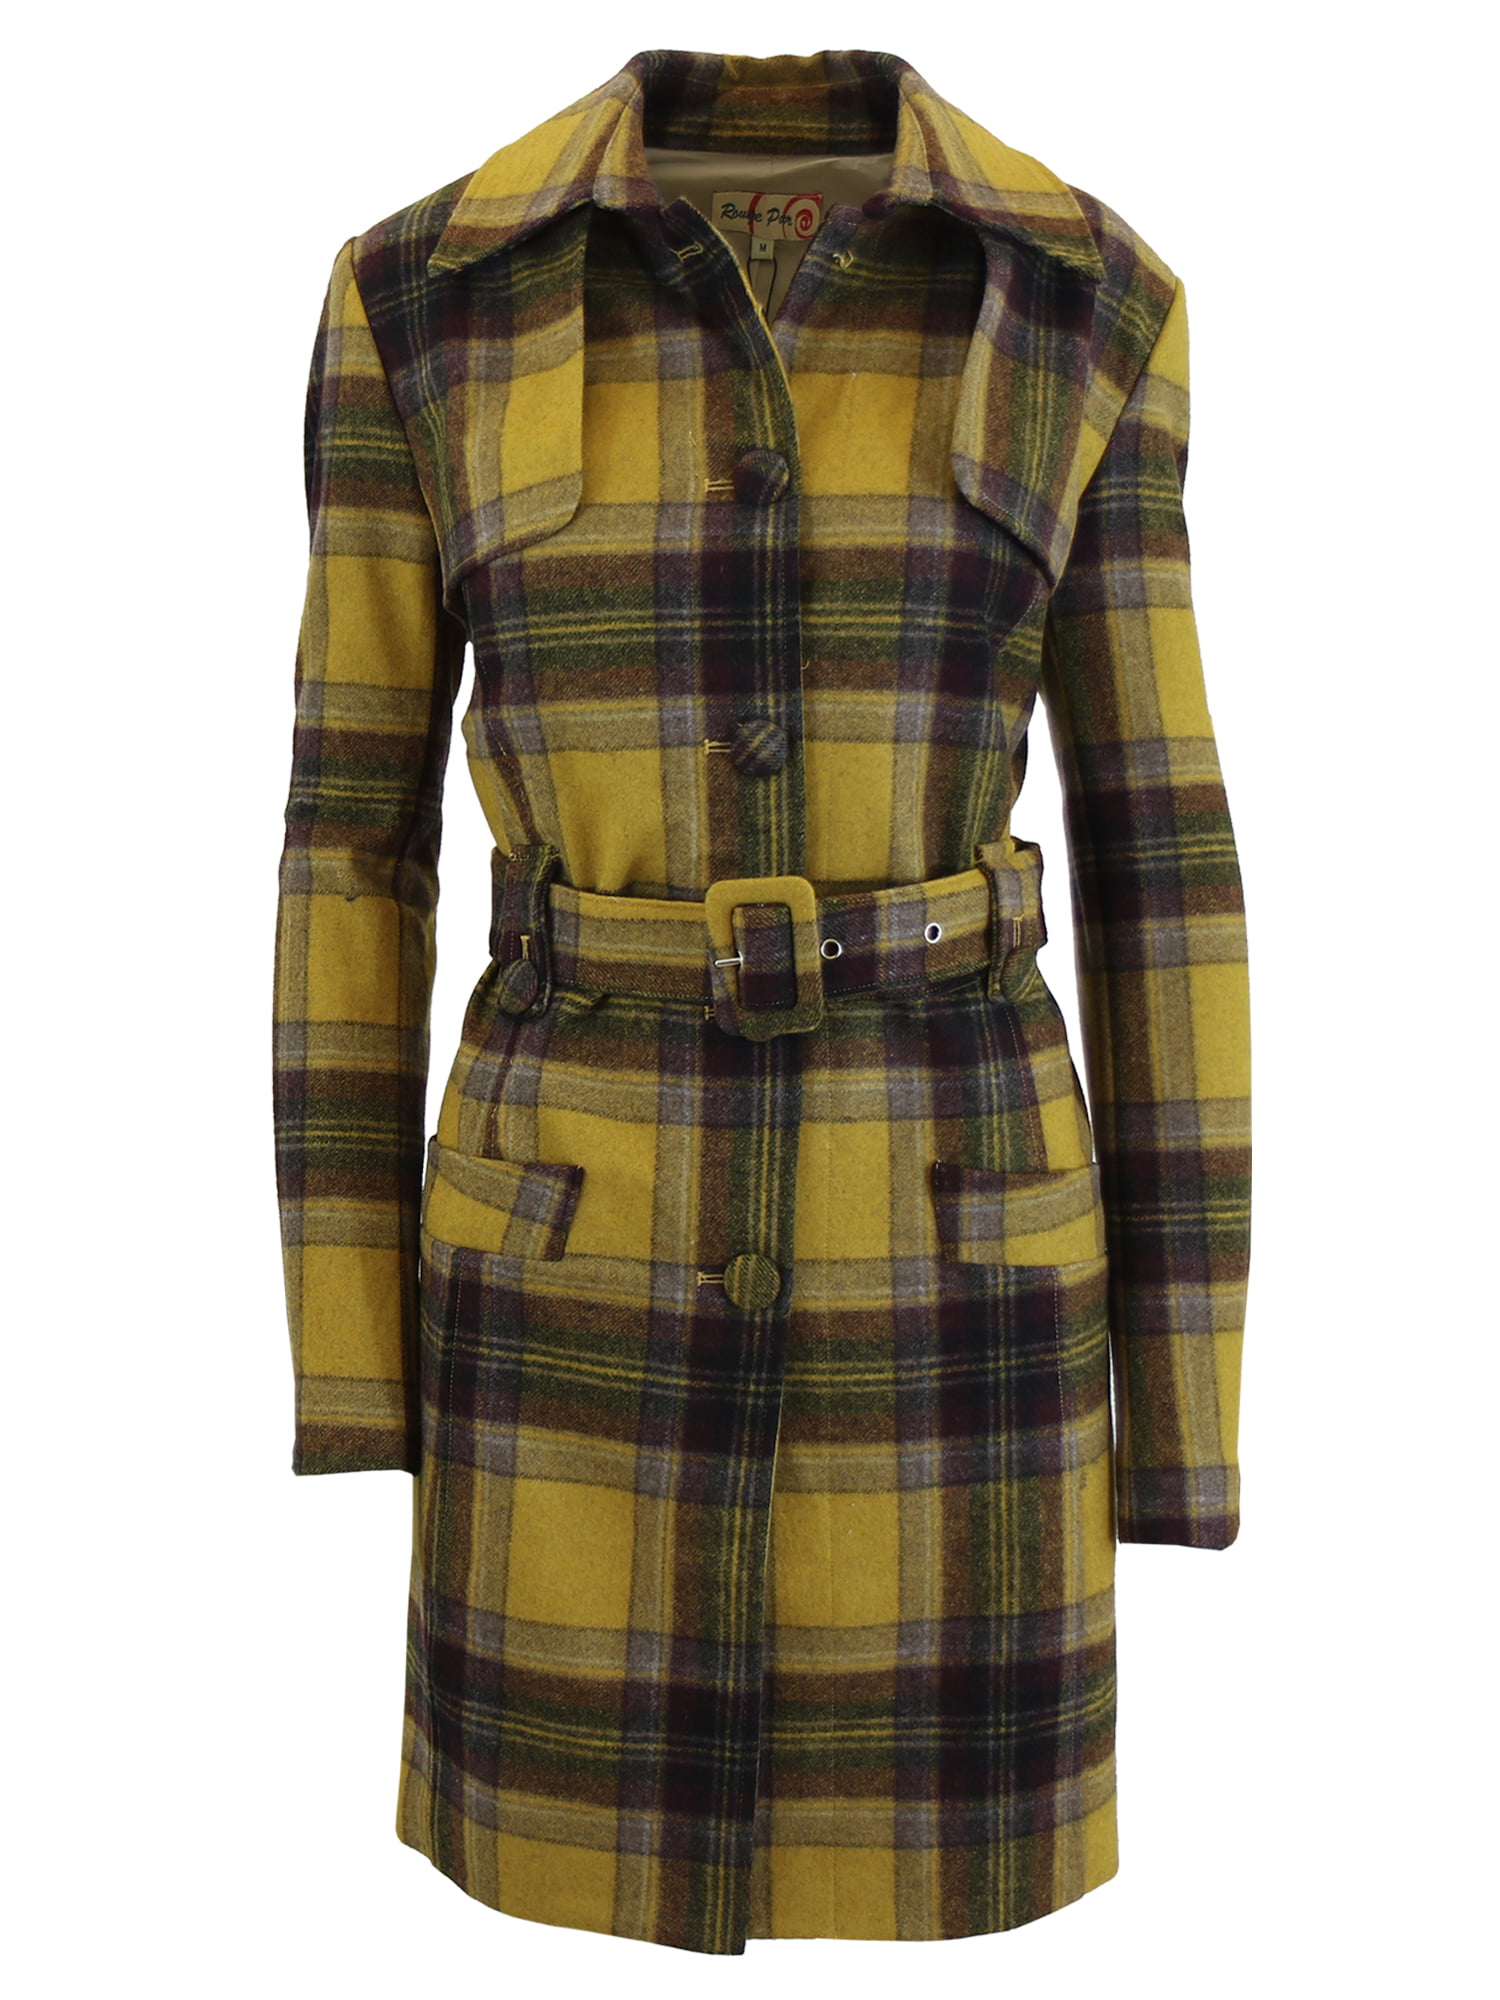 Women’s Wool Plaid Trench Coat Jacket With Belt - SLIM-FIT DESIGN ...